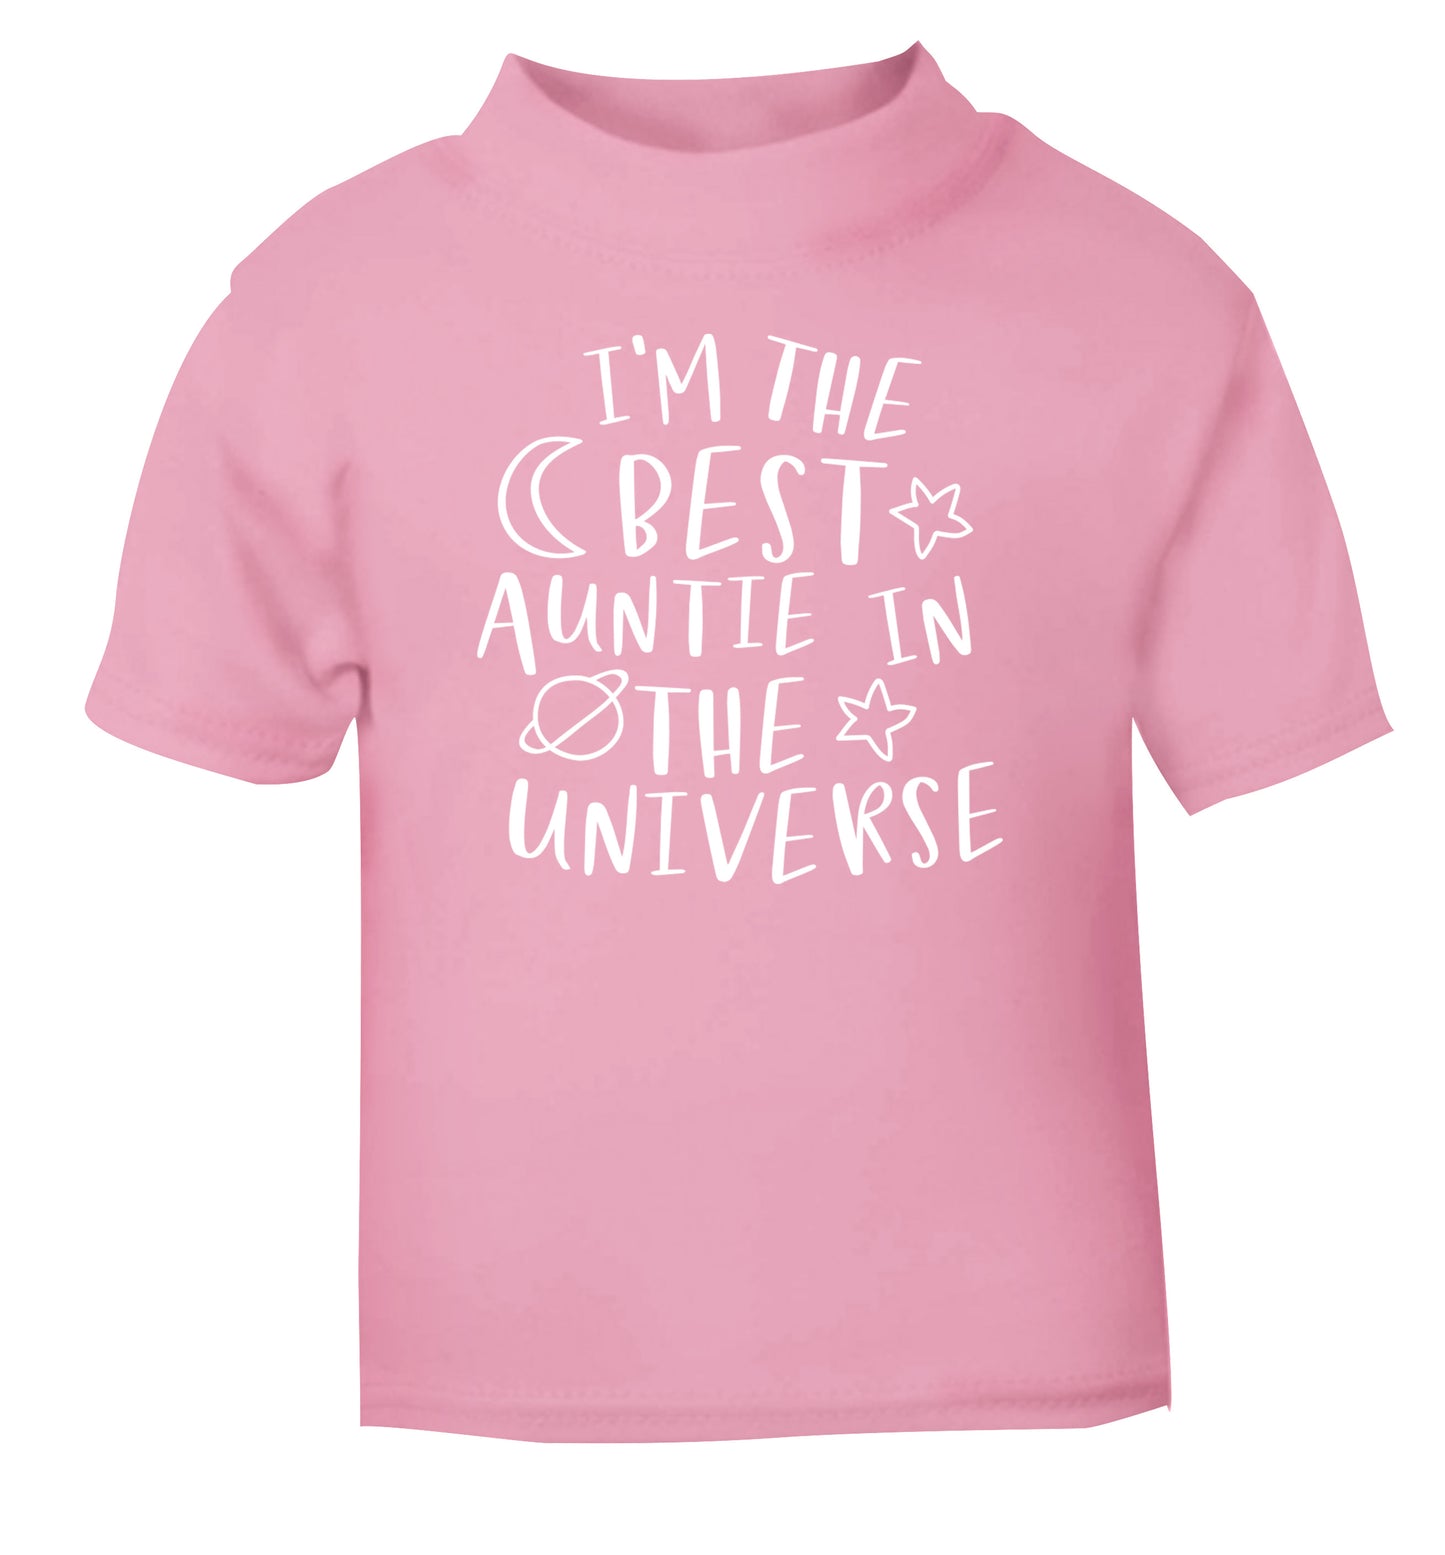 I'm the best auntie in the universe light pink Baby Toddler Tshirt 2 Years